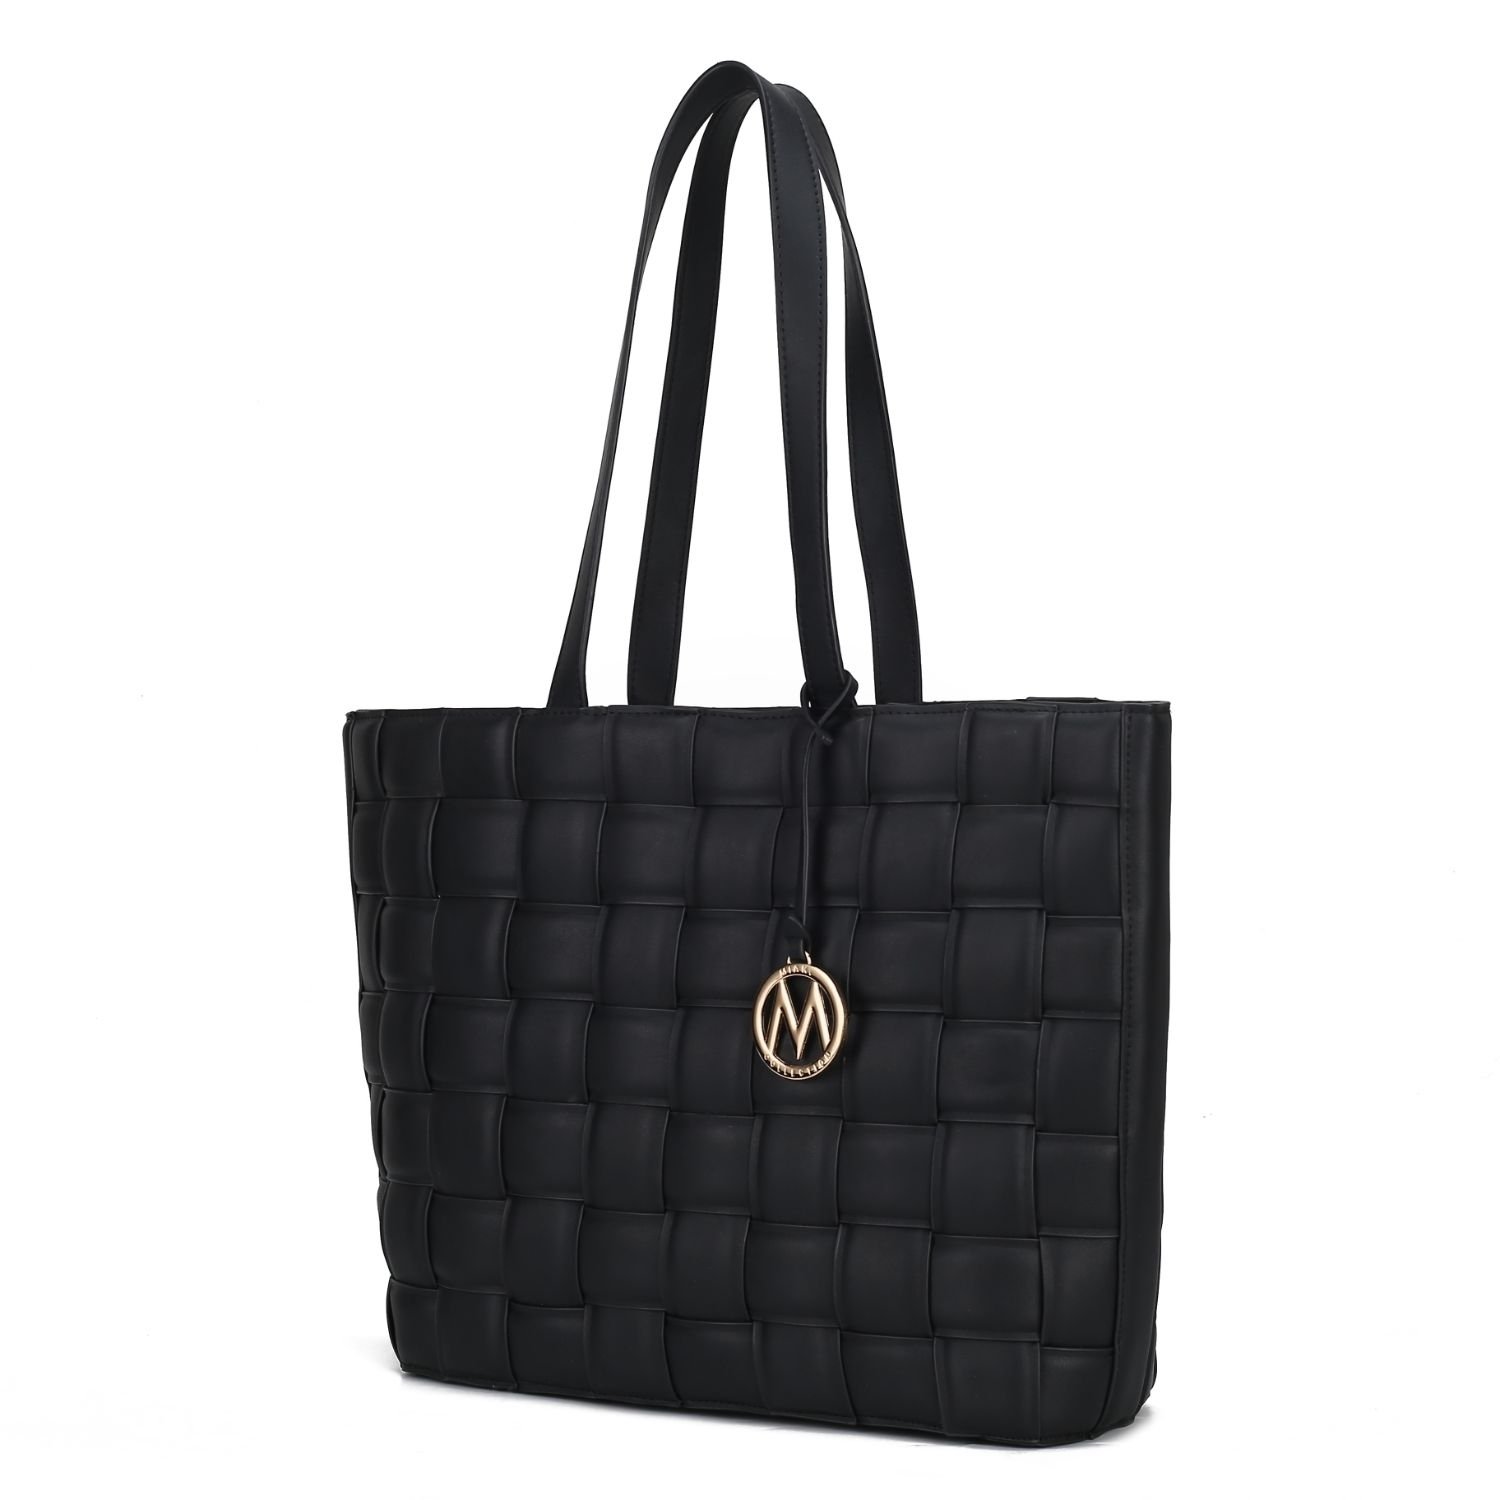 MKF Collection Rowan Woven Vegan Leather Women's Tote Bag By Mia K - Charcoal